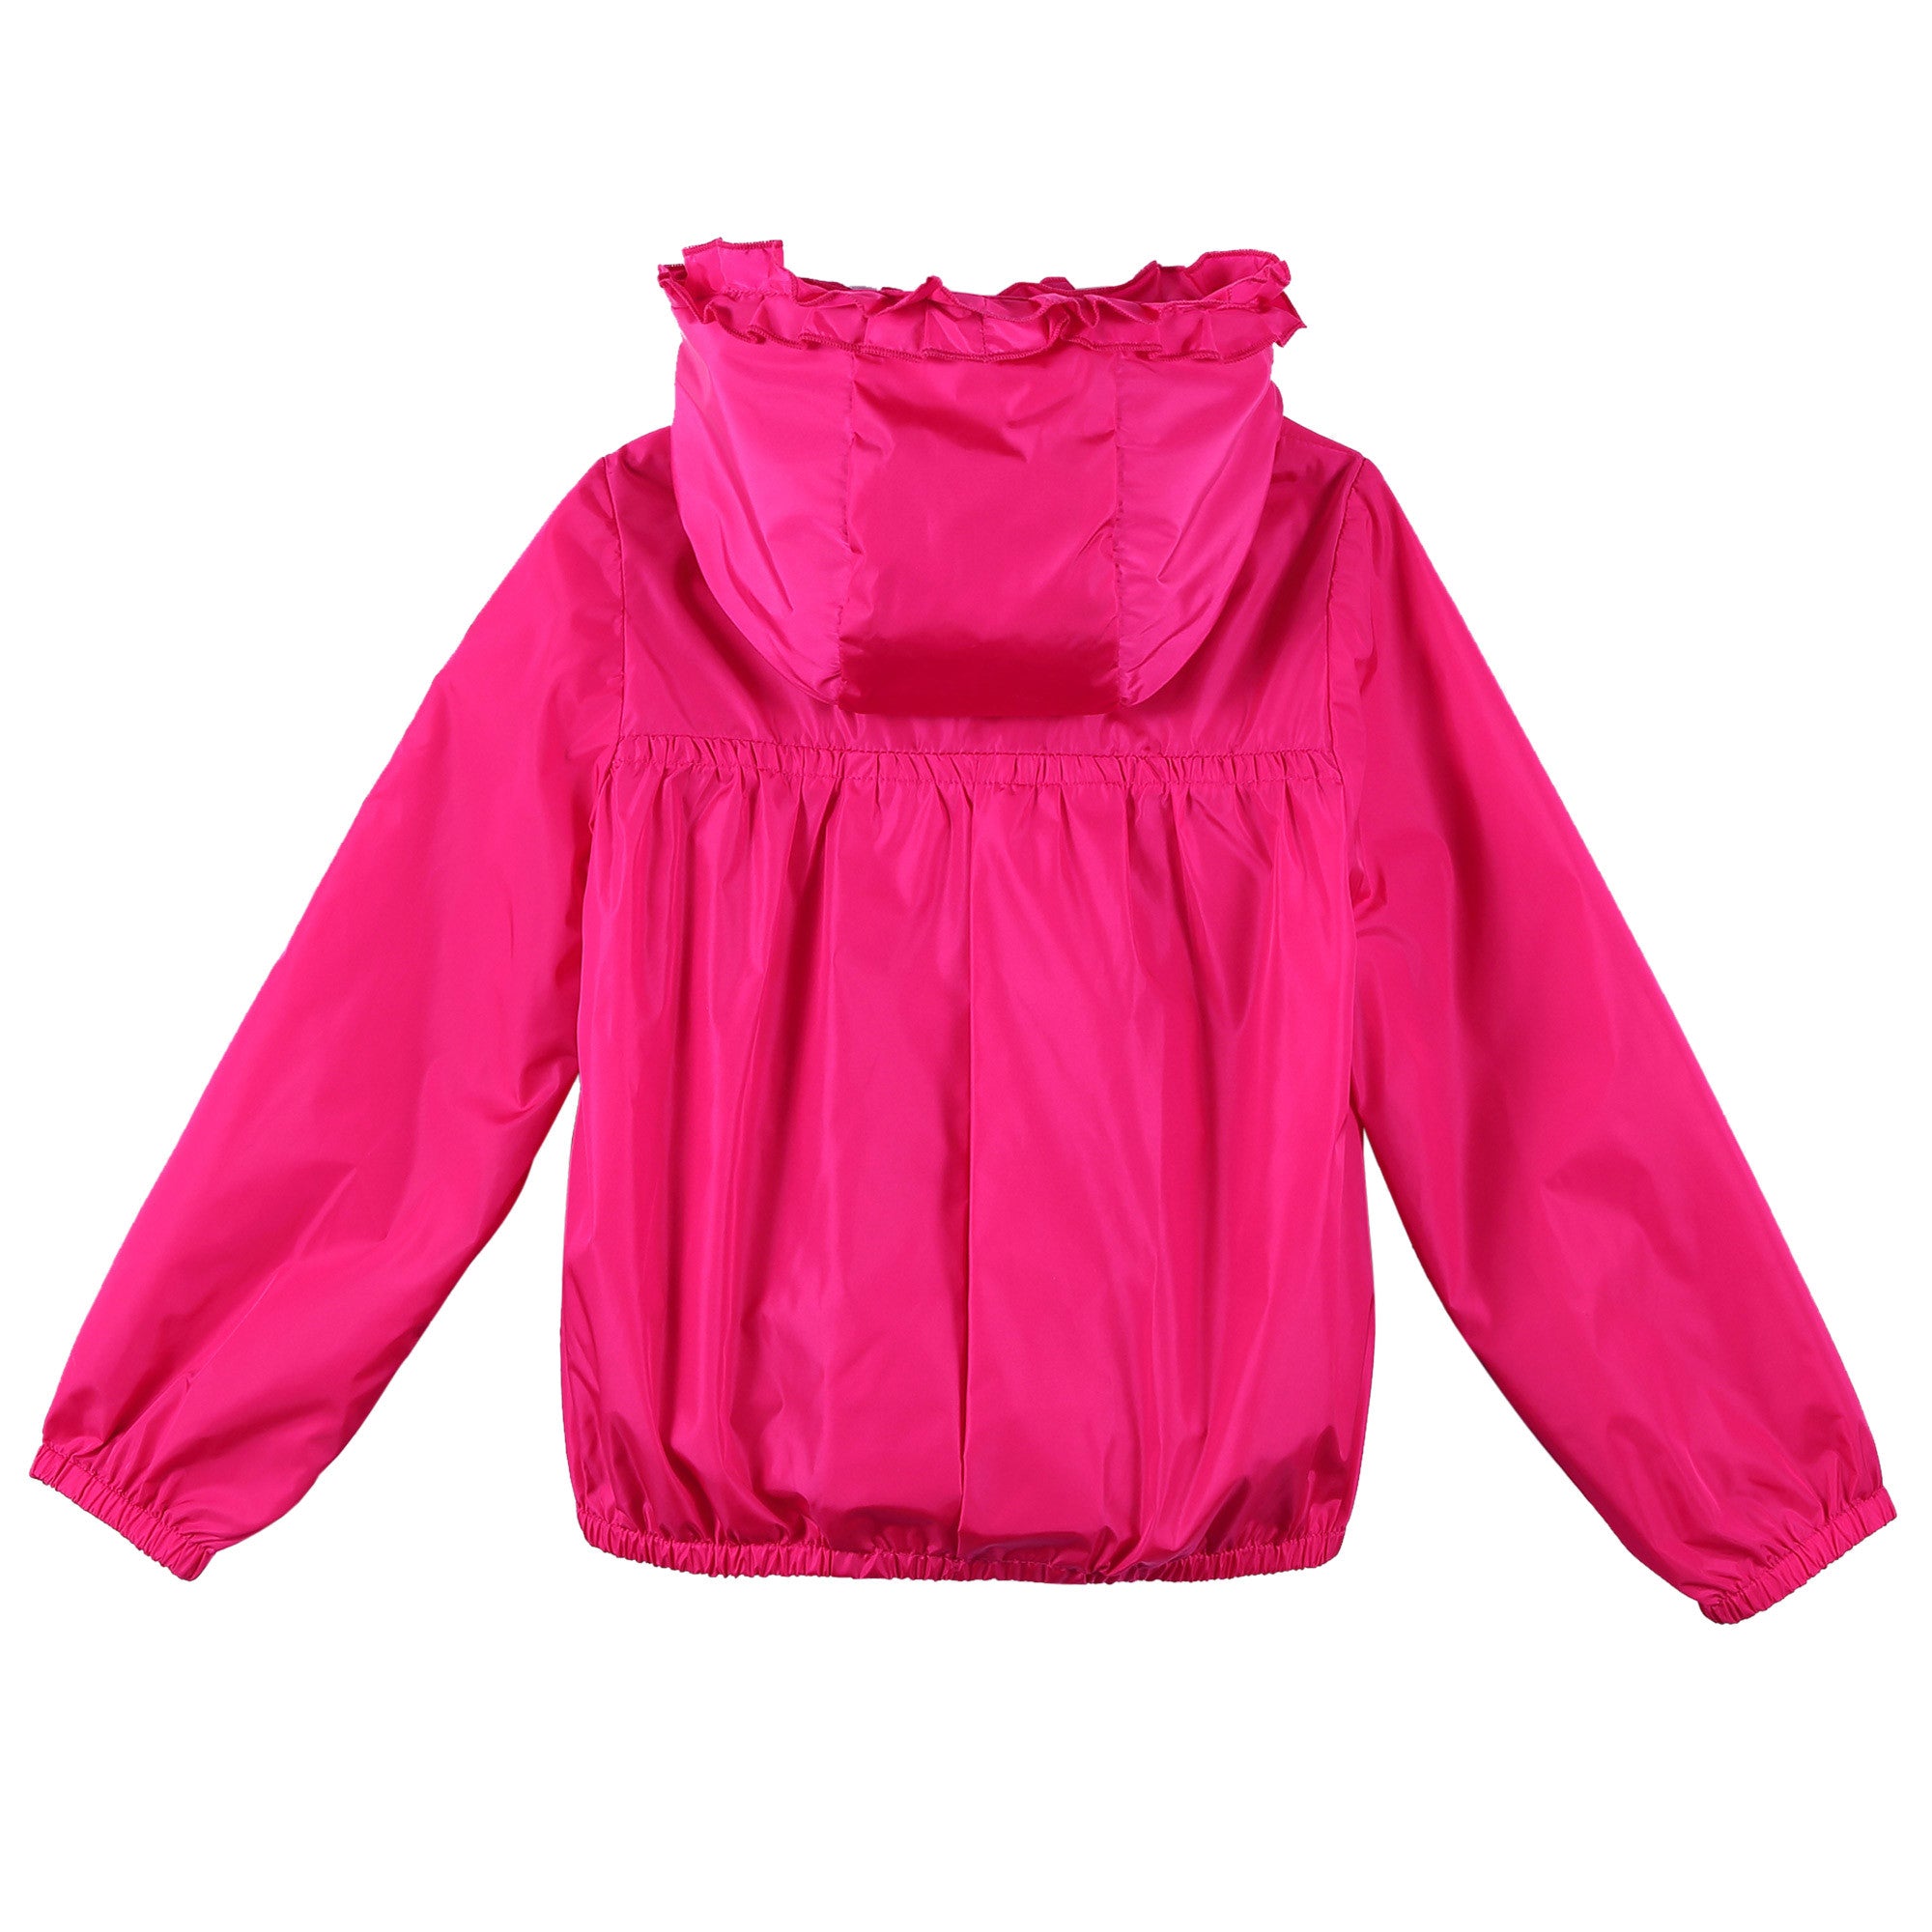 Girls Rose Red Frilly Hooded 'Darma' Zip-Up Tops - CÉMAROSE | Children's Fashion Store - 2